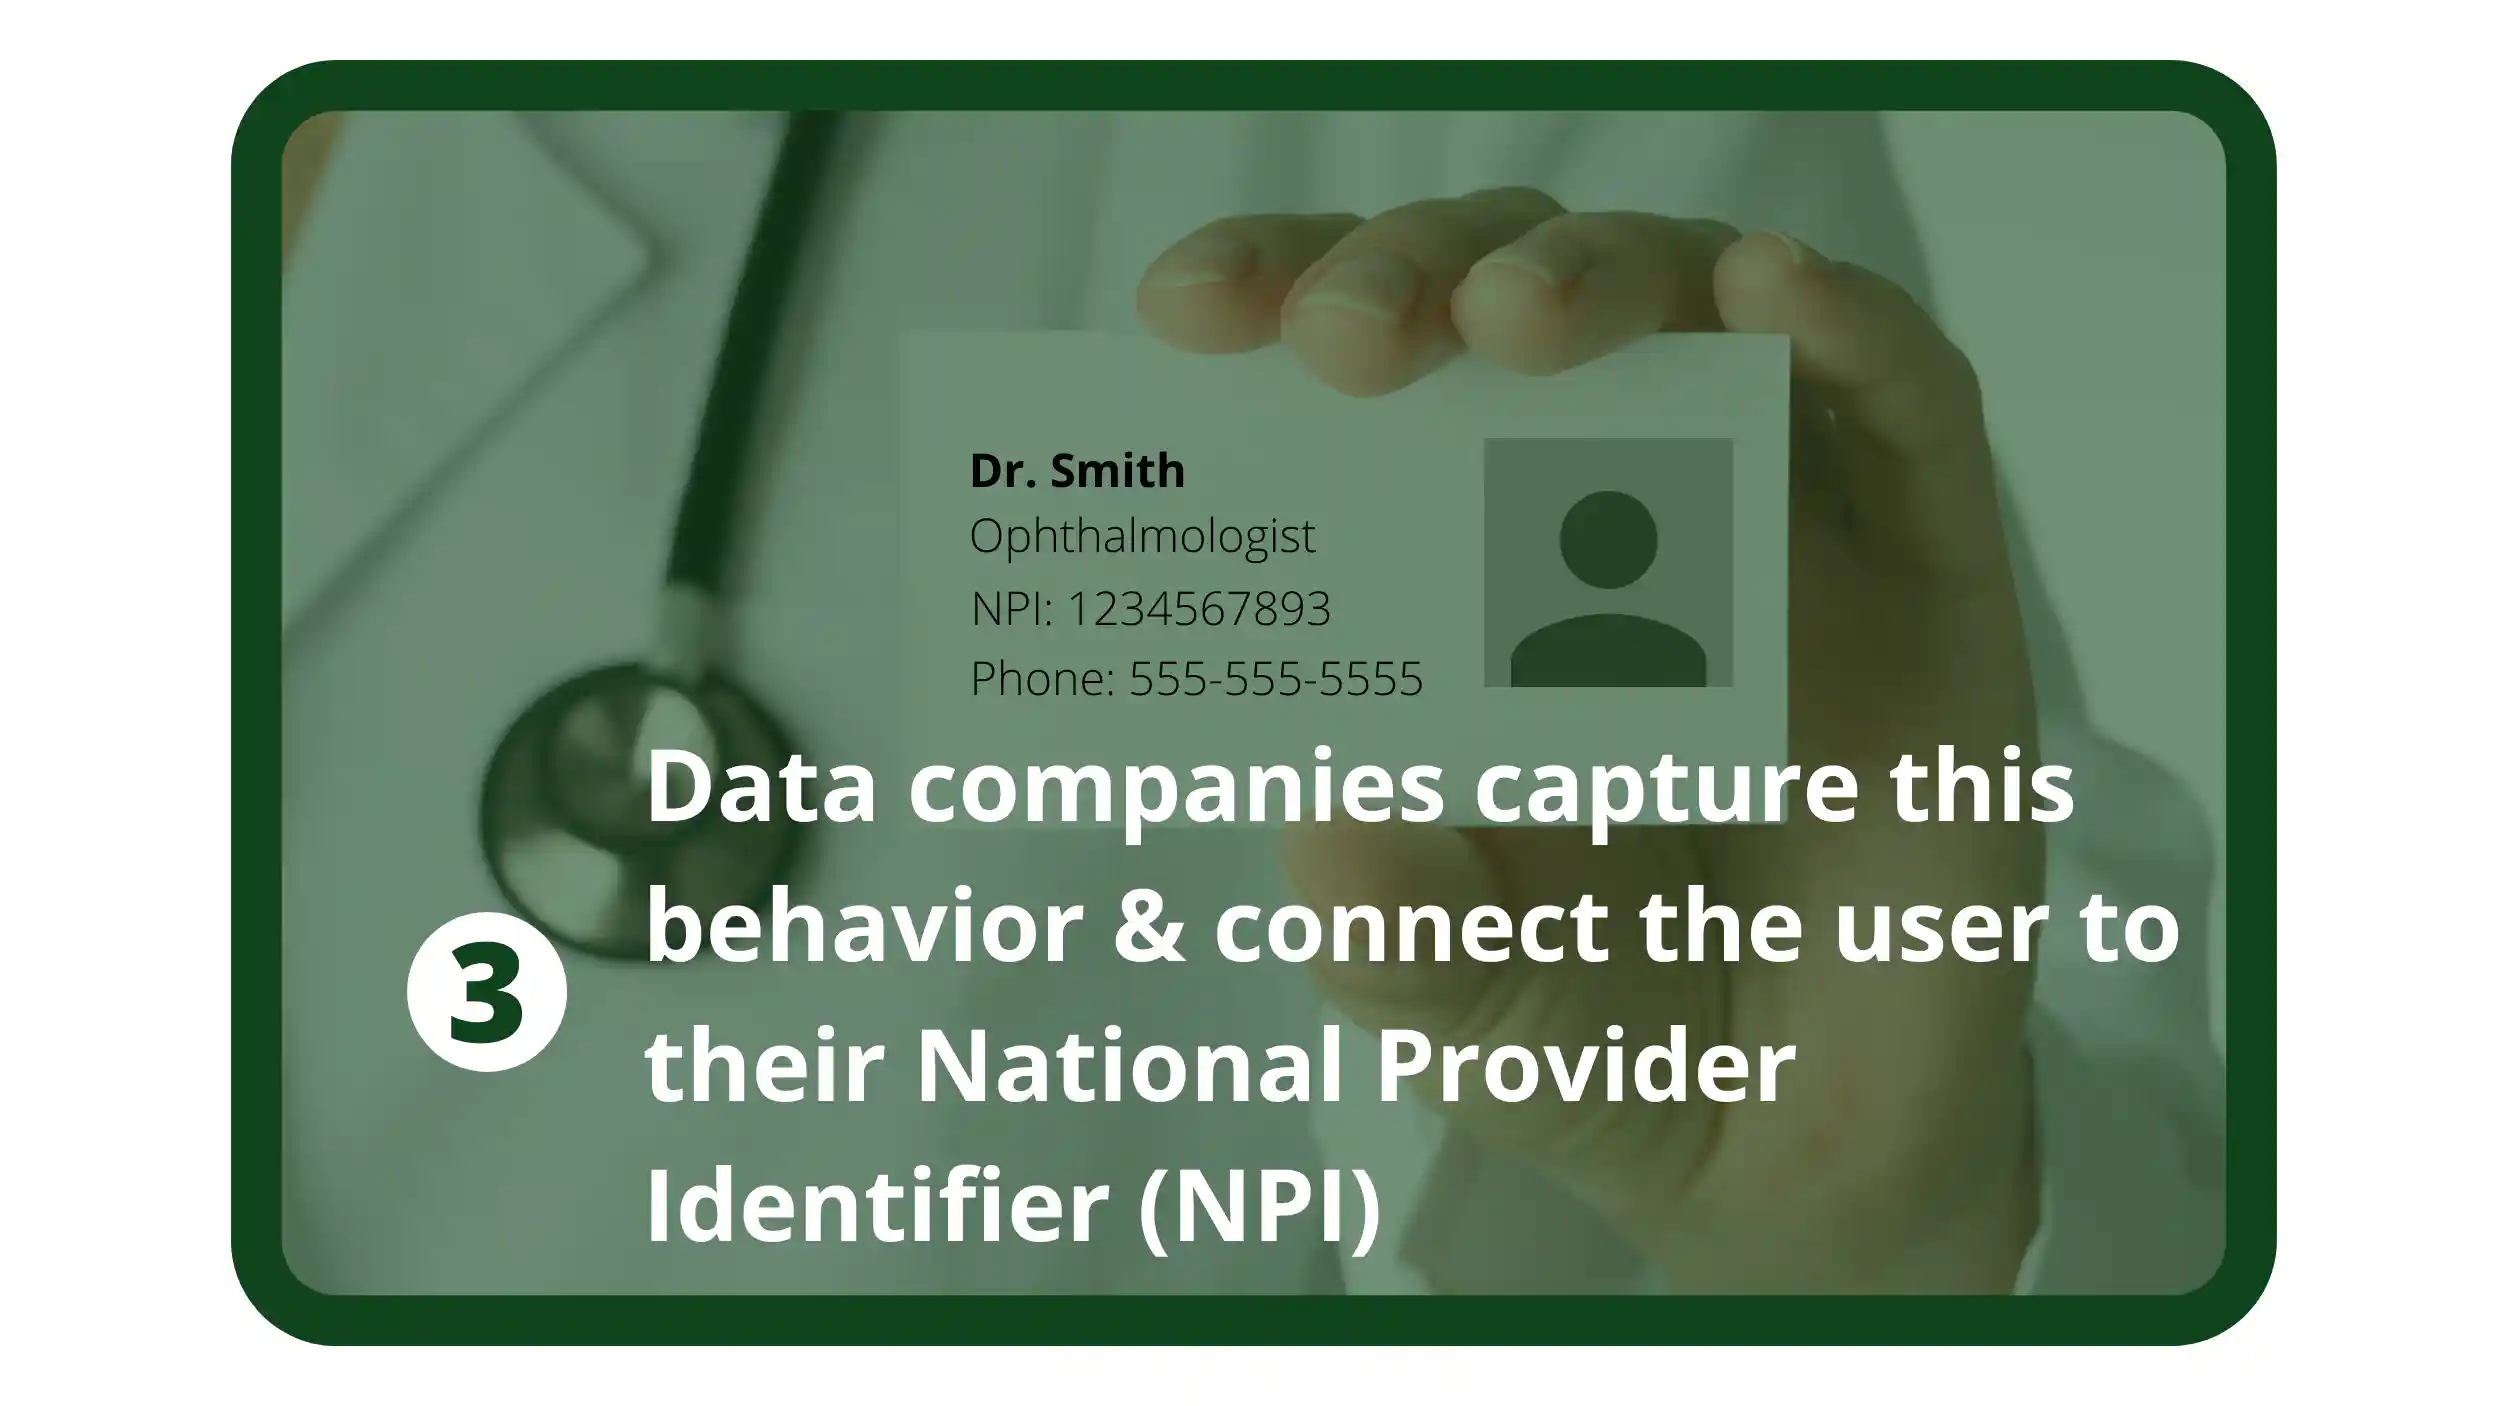 Data companies capture this behavior and connect the user to their NPI